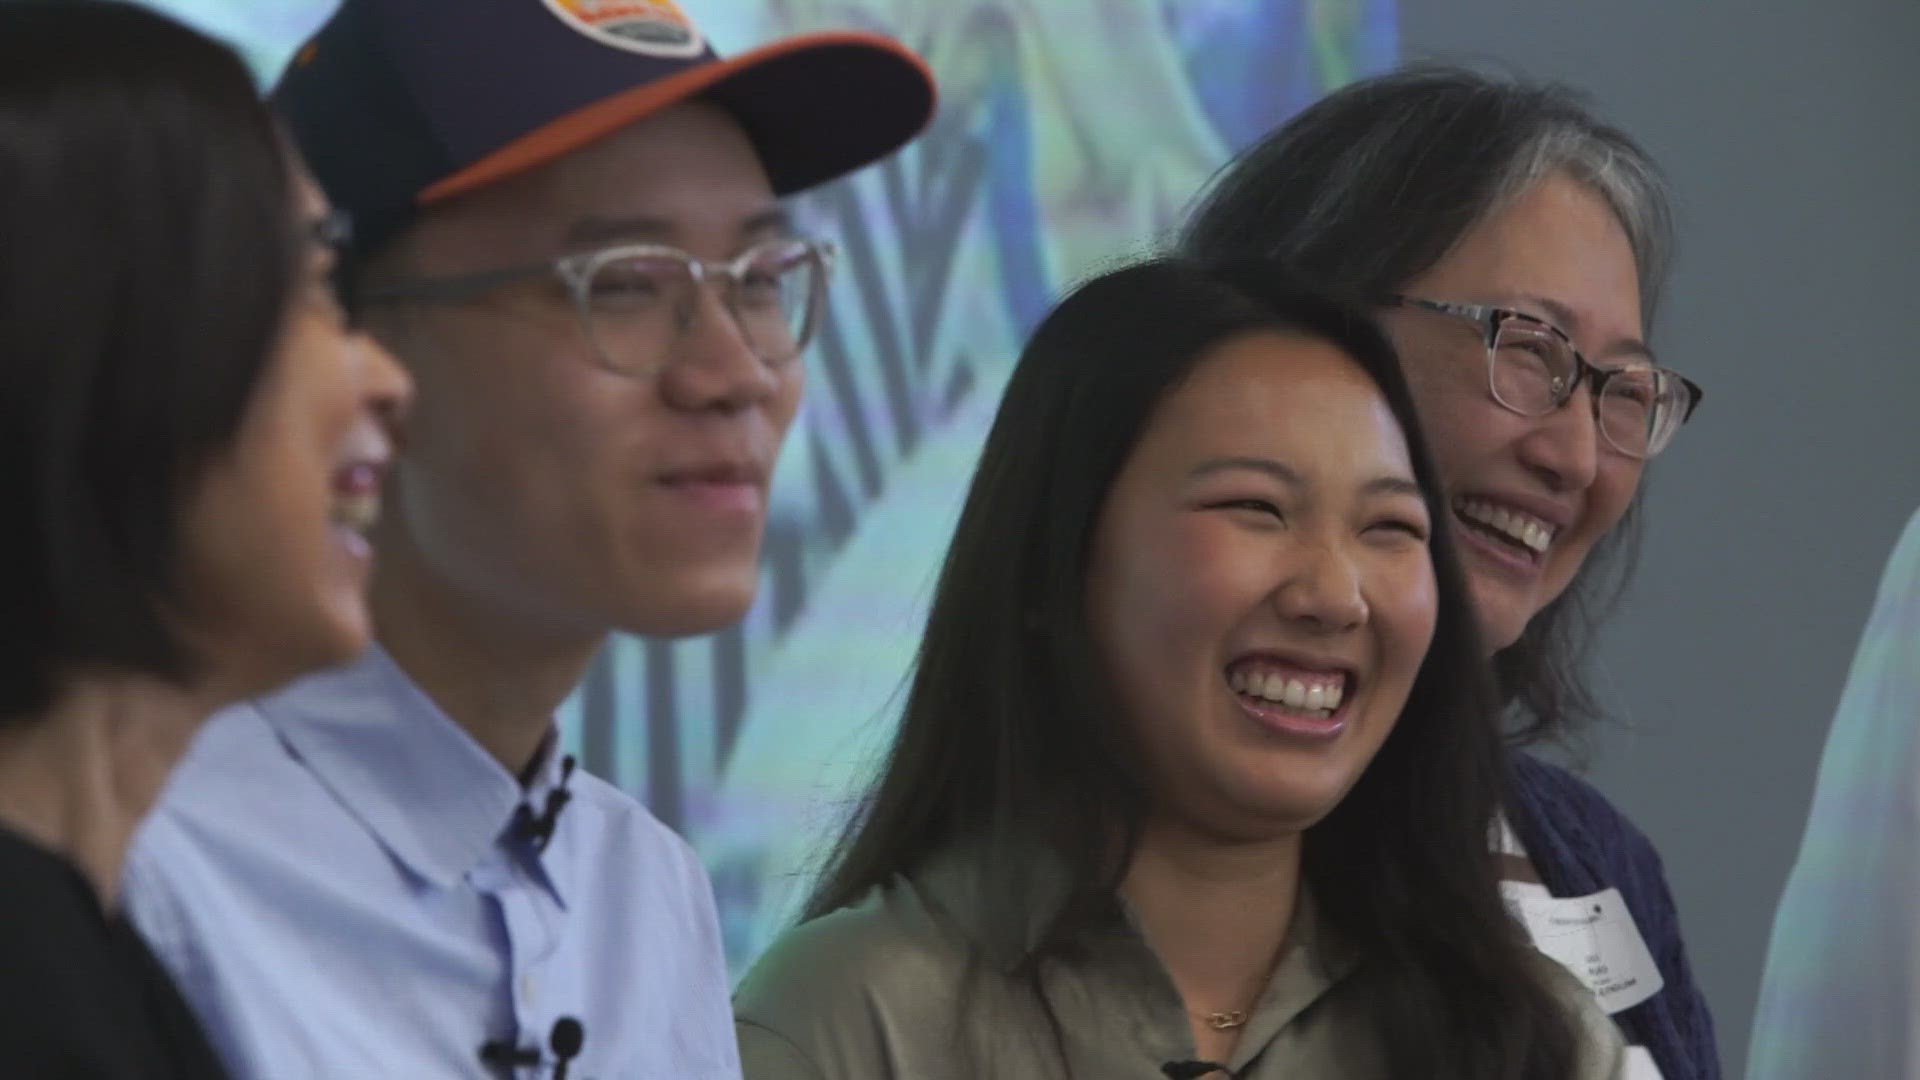 "I think that I just have a lot of gratitude to be here right now and to have this experience," said donor Sarah Yang.